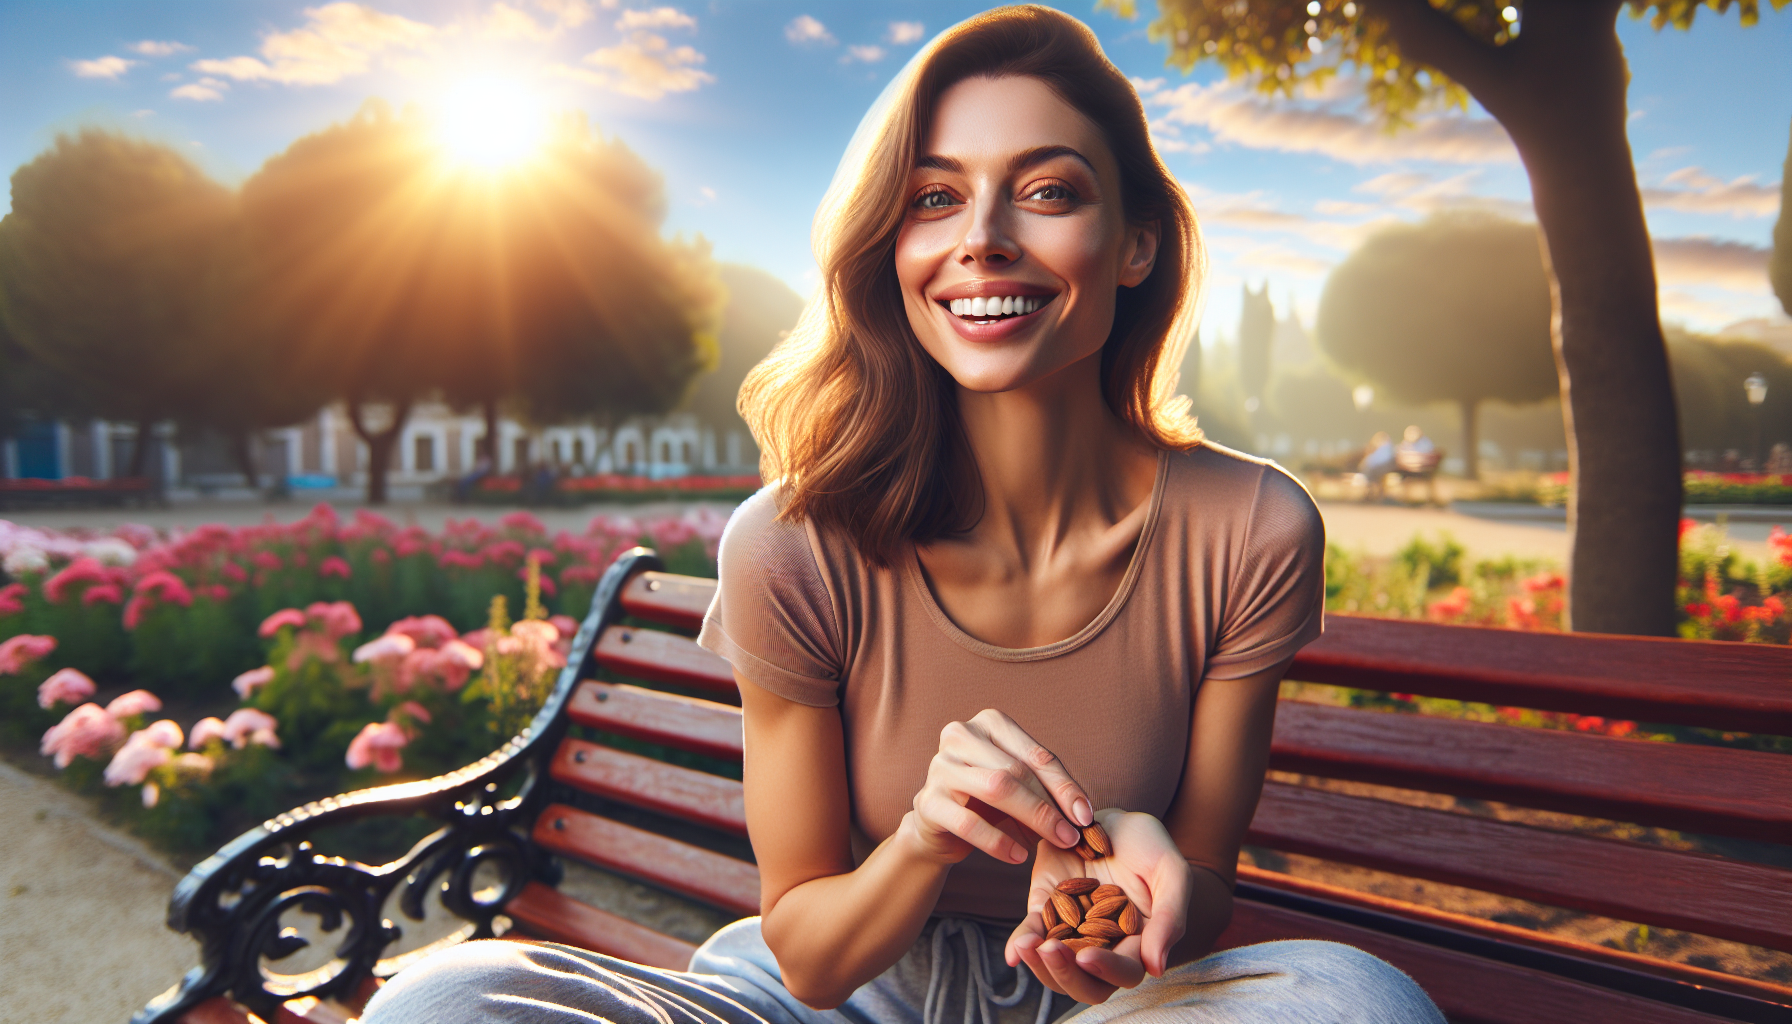 A woman enjoying a mid-morning snack of almonds